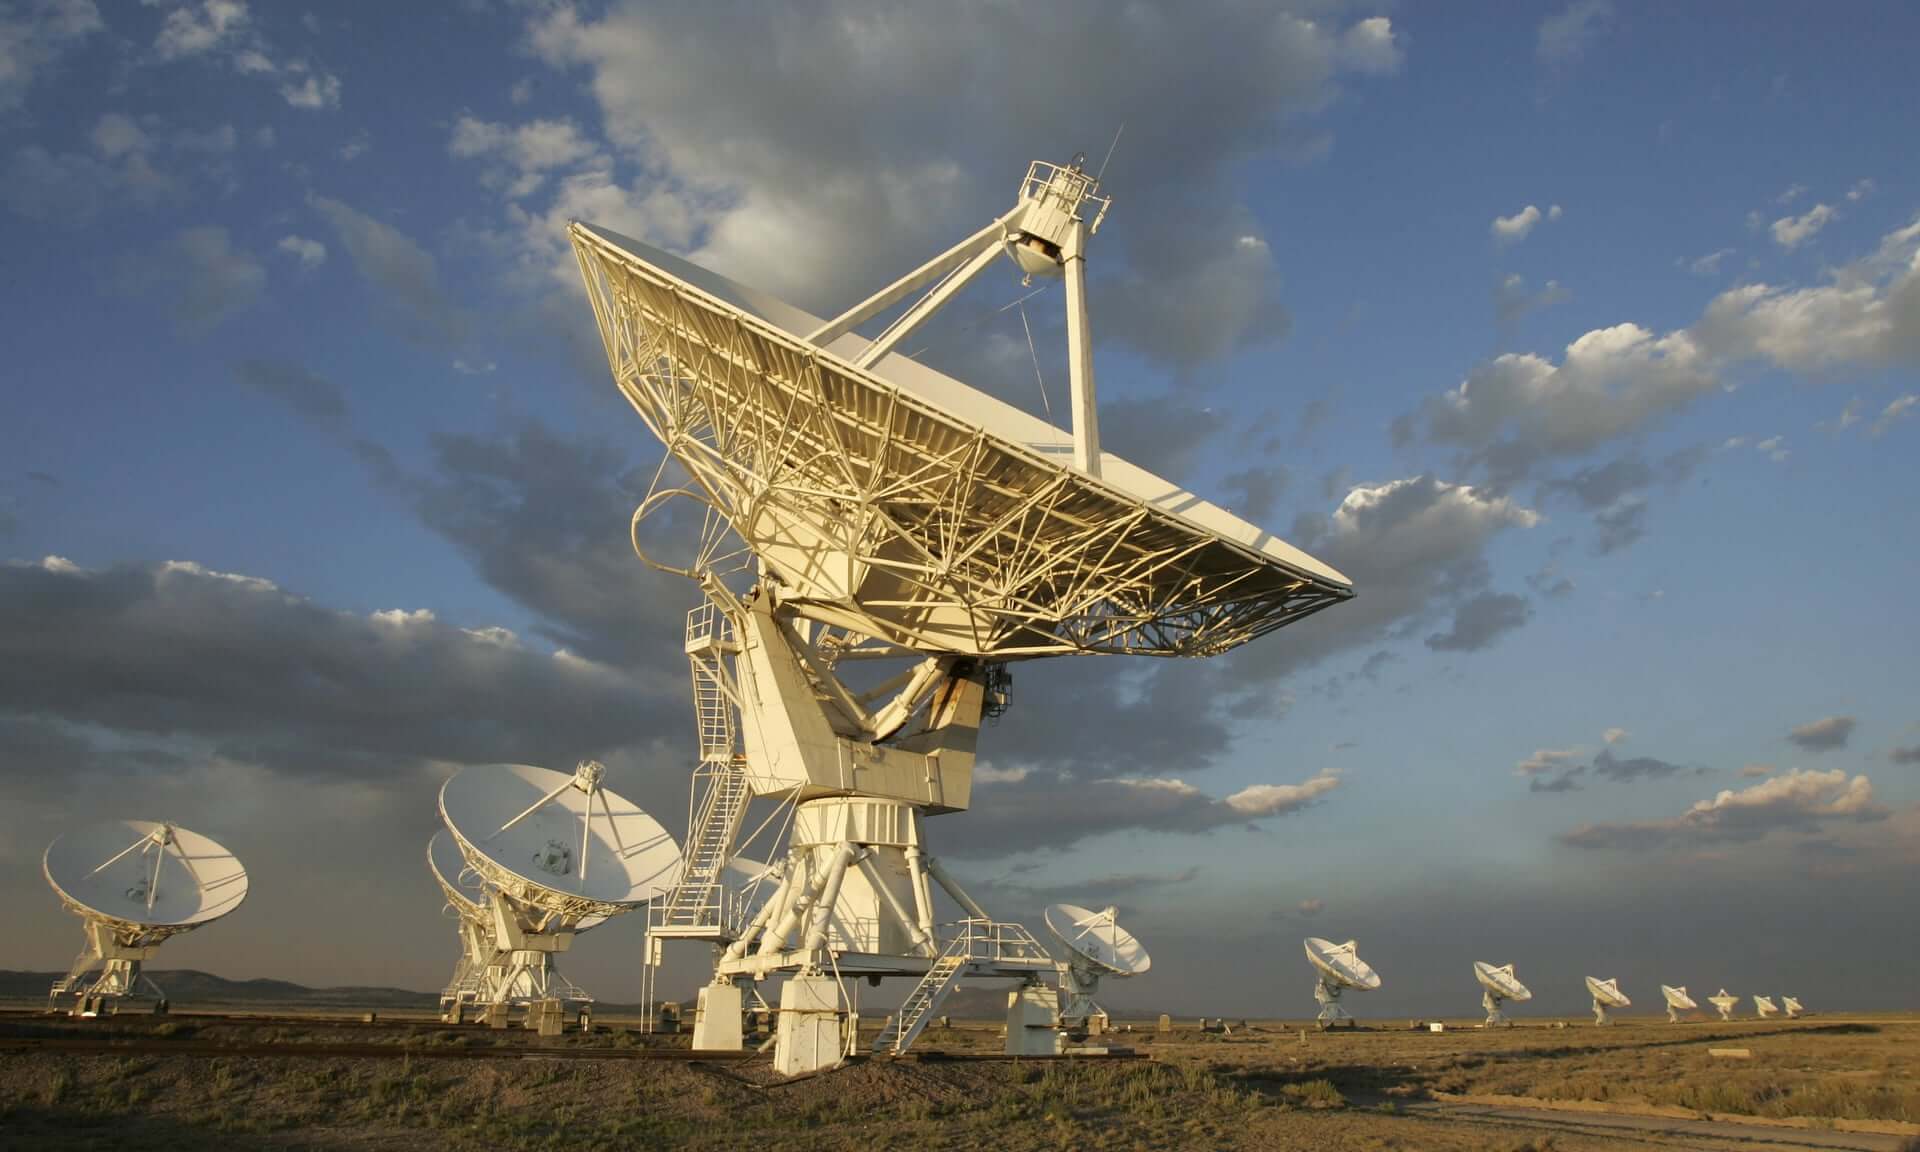 Why the search for extraterrestrial life should be taken seriously?